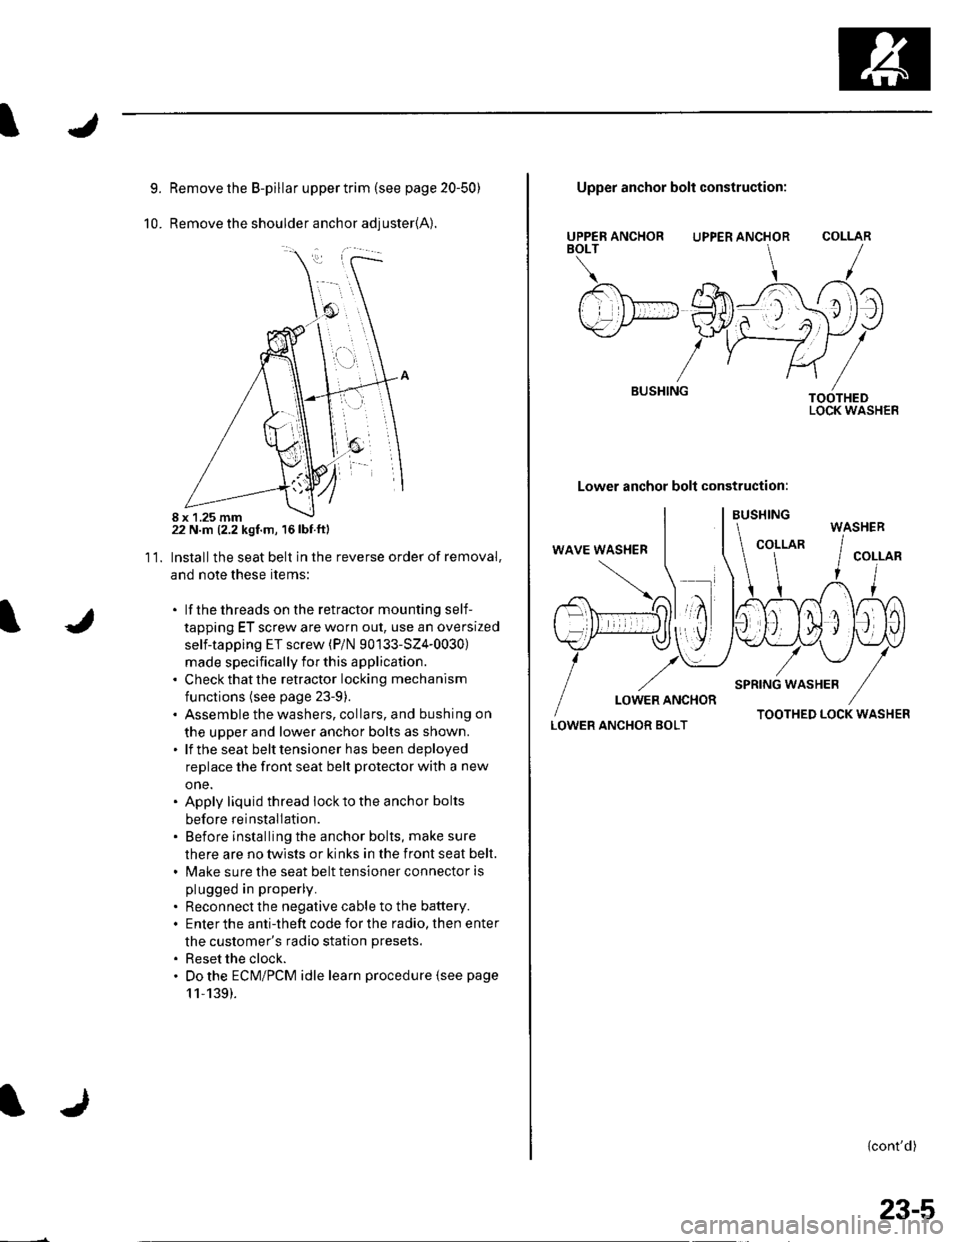 HONDA CIVIC 2003 7.G Workshop Manual 9.
10.
Remove the B-pillar upper trim {see page 20-50)
Remove the shoulder anchor adjuster{A).
22 N.m (2.2 kgf.m, 16lbf.ftl
Installthe seat belt in the reverse order of removal,
and note these items:
